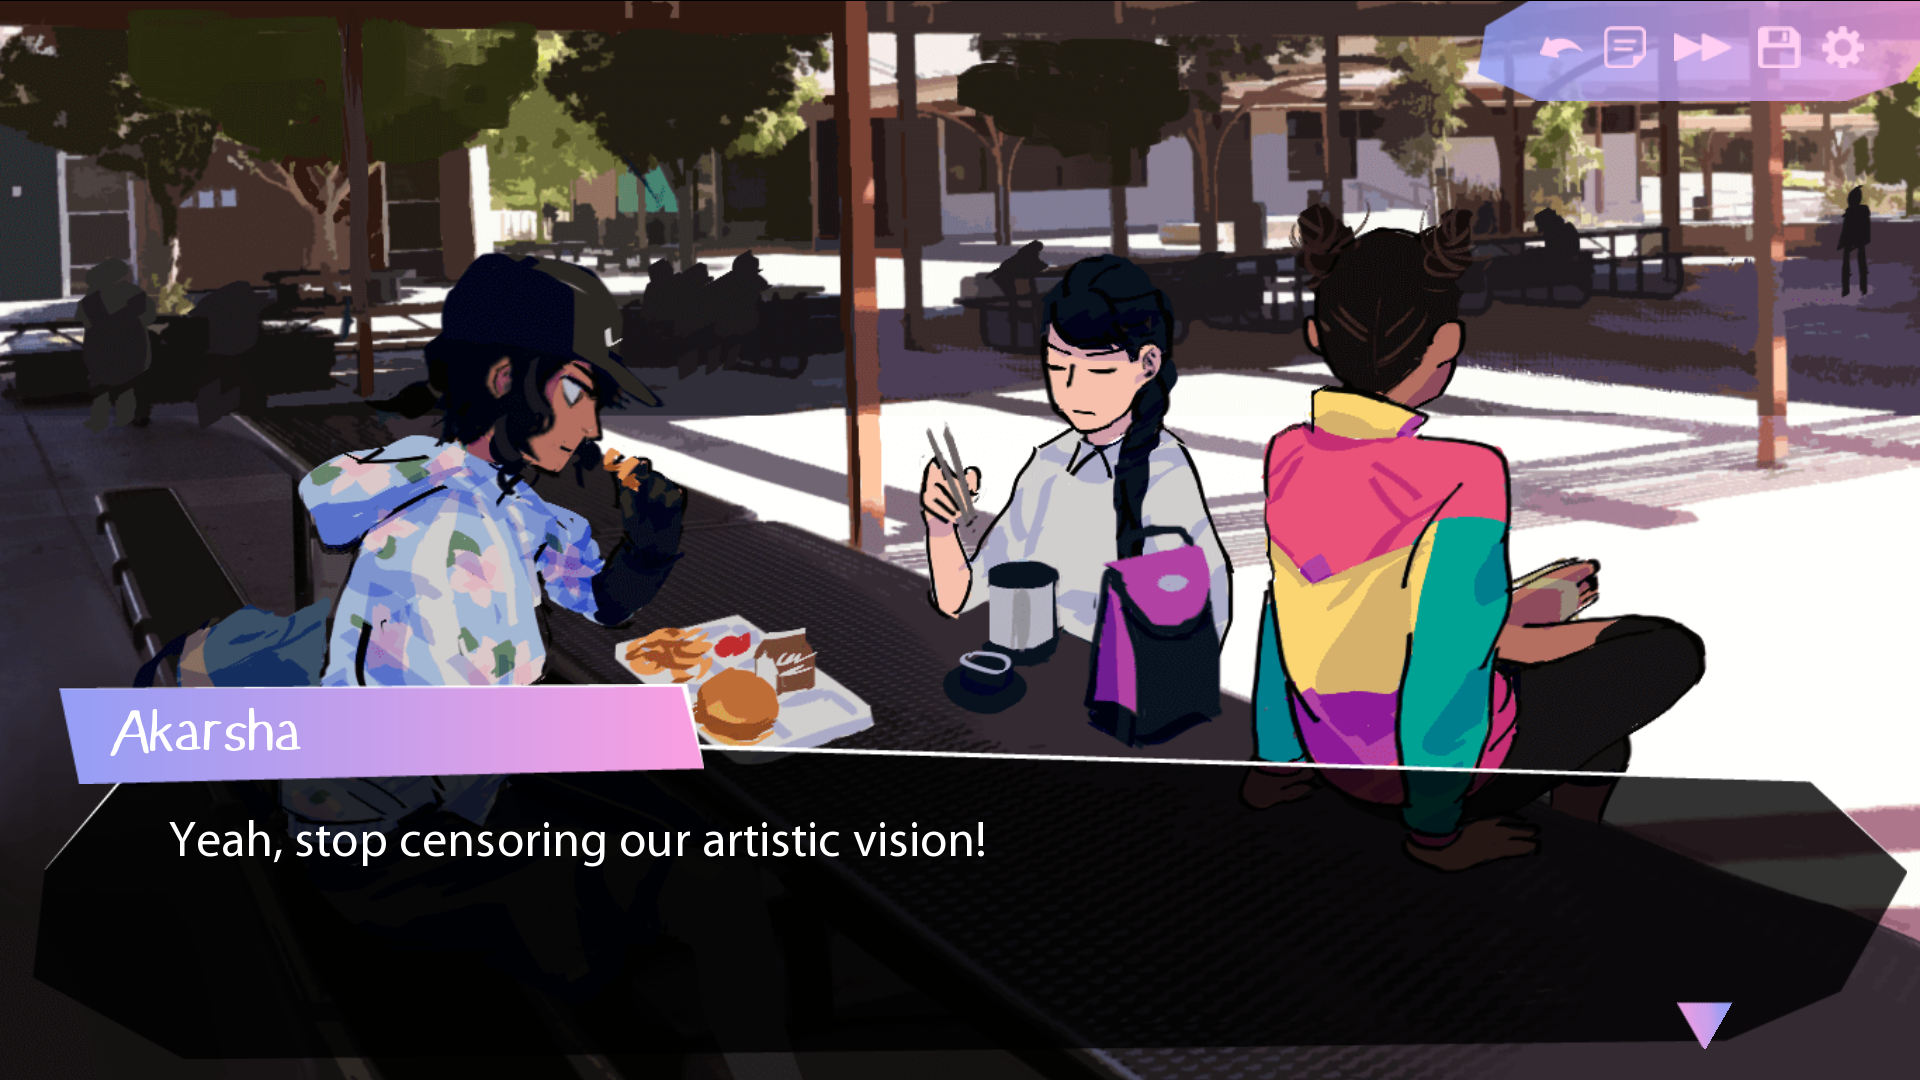 Butterfly Soup 2 screenshot of Diya, Noelle and Akarsha eating lunch together while Akarsha says "Yeah, stop censoring our artistic vision!"